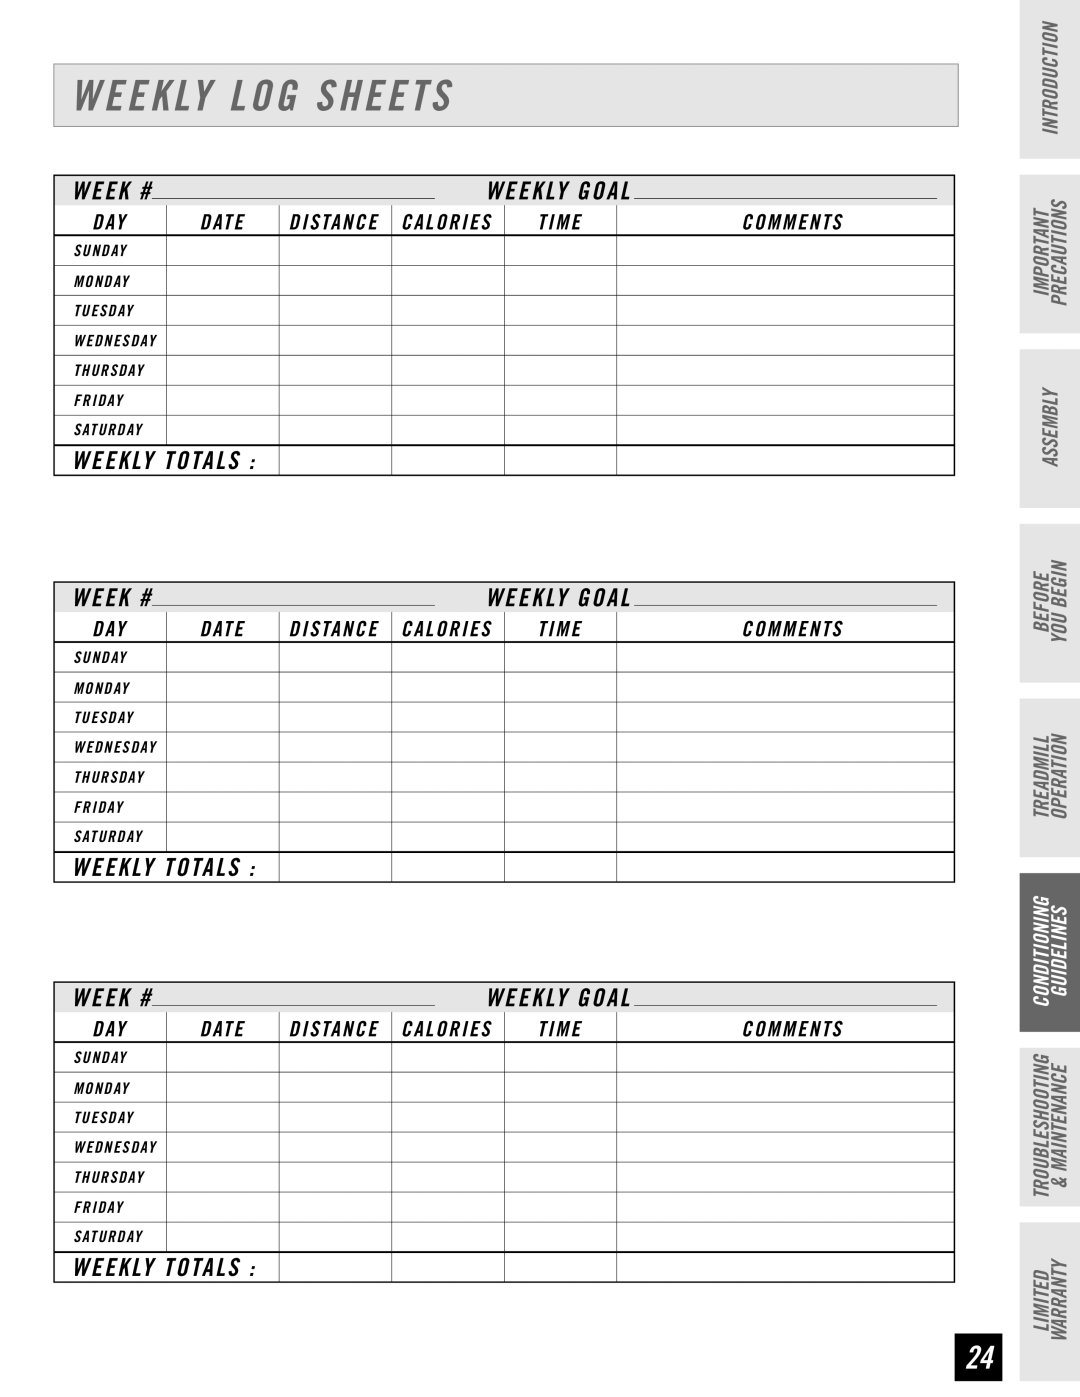 Horizon Fitness T61, T62 Weekly Log Sheets, Assembly, Important Precautions Introduction, Weekly Goal, Before You Begin 